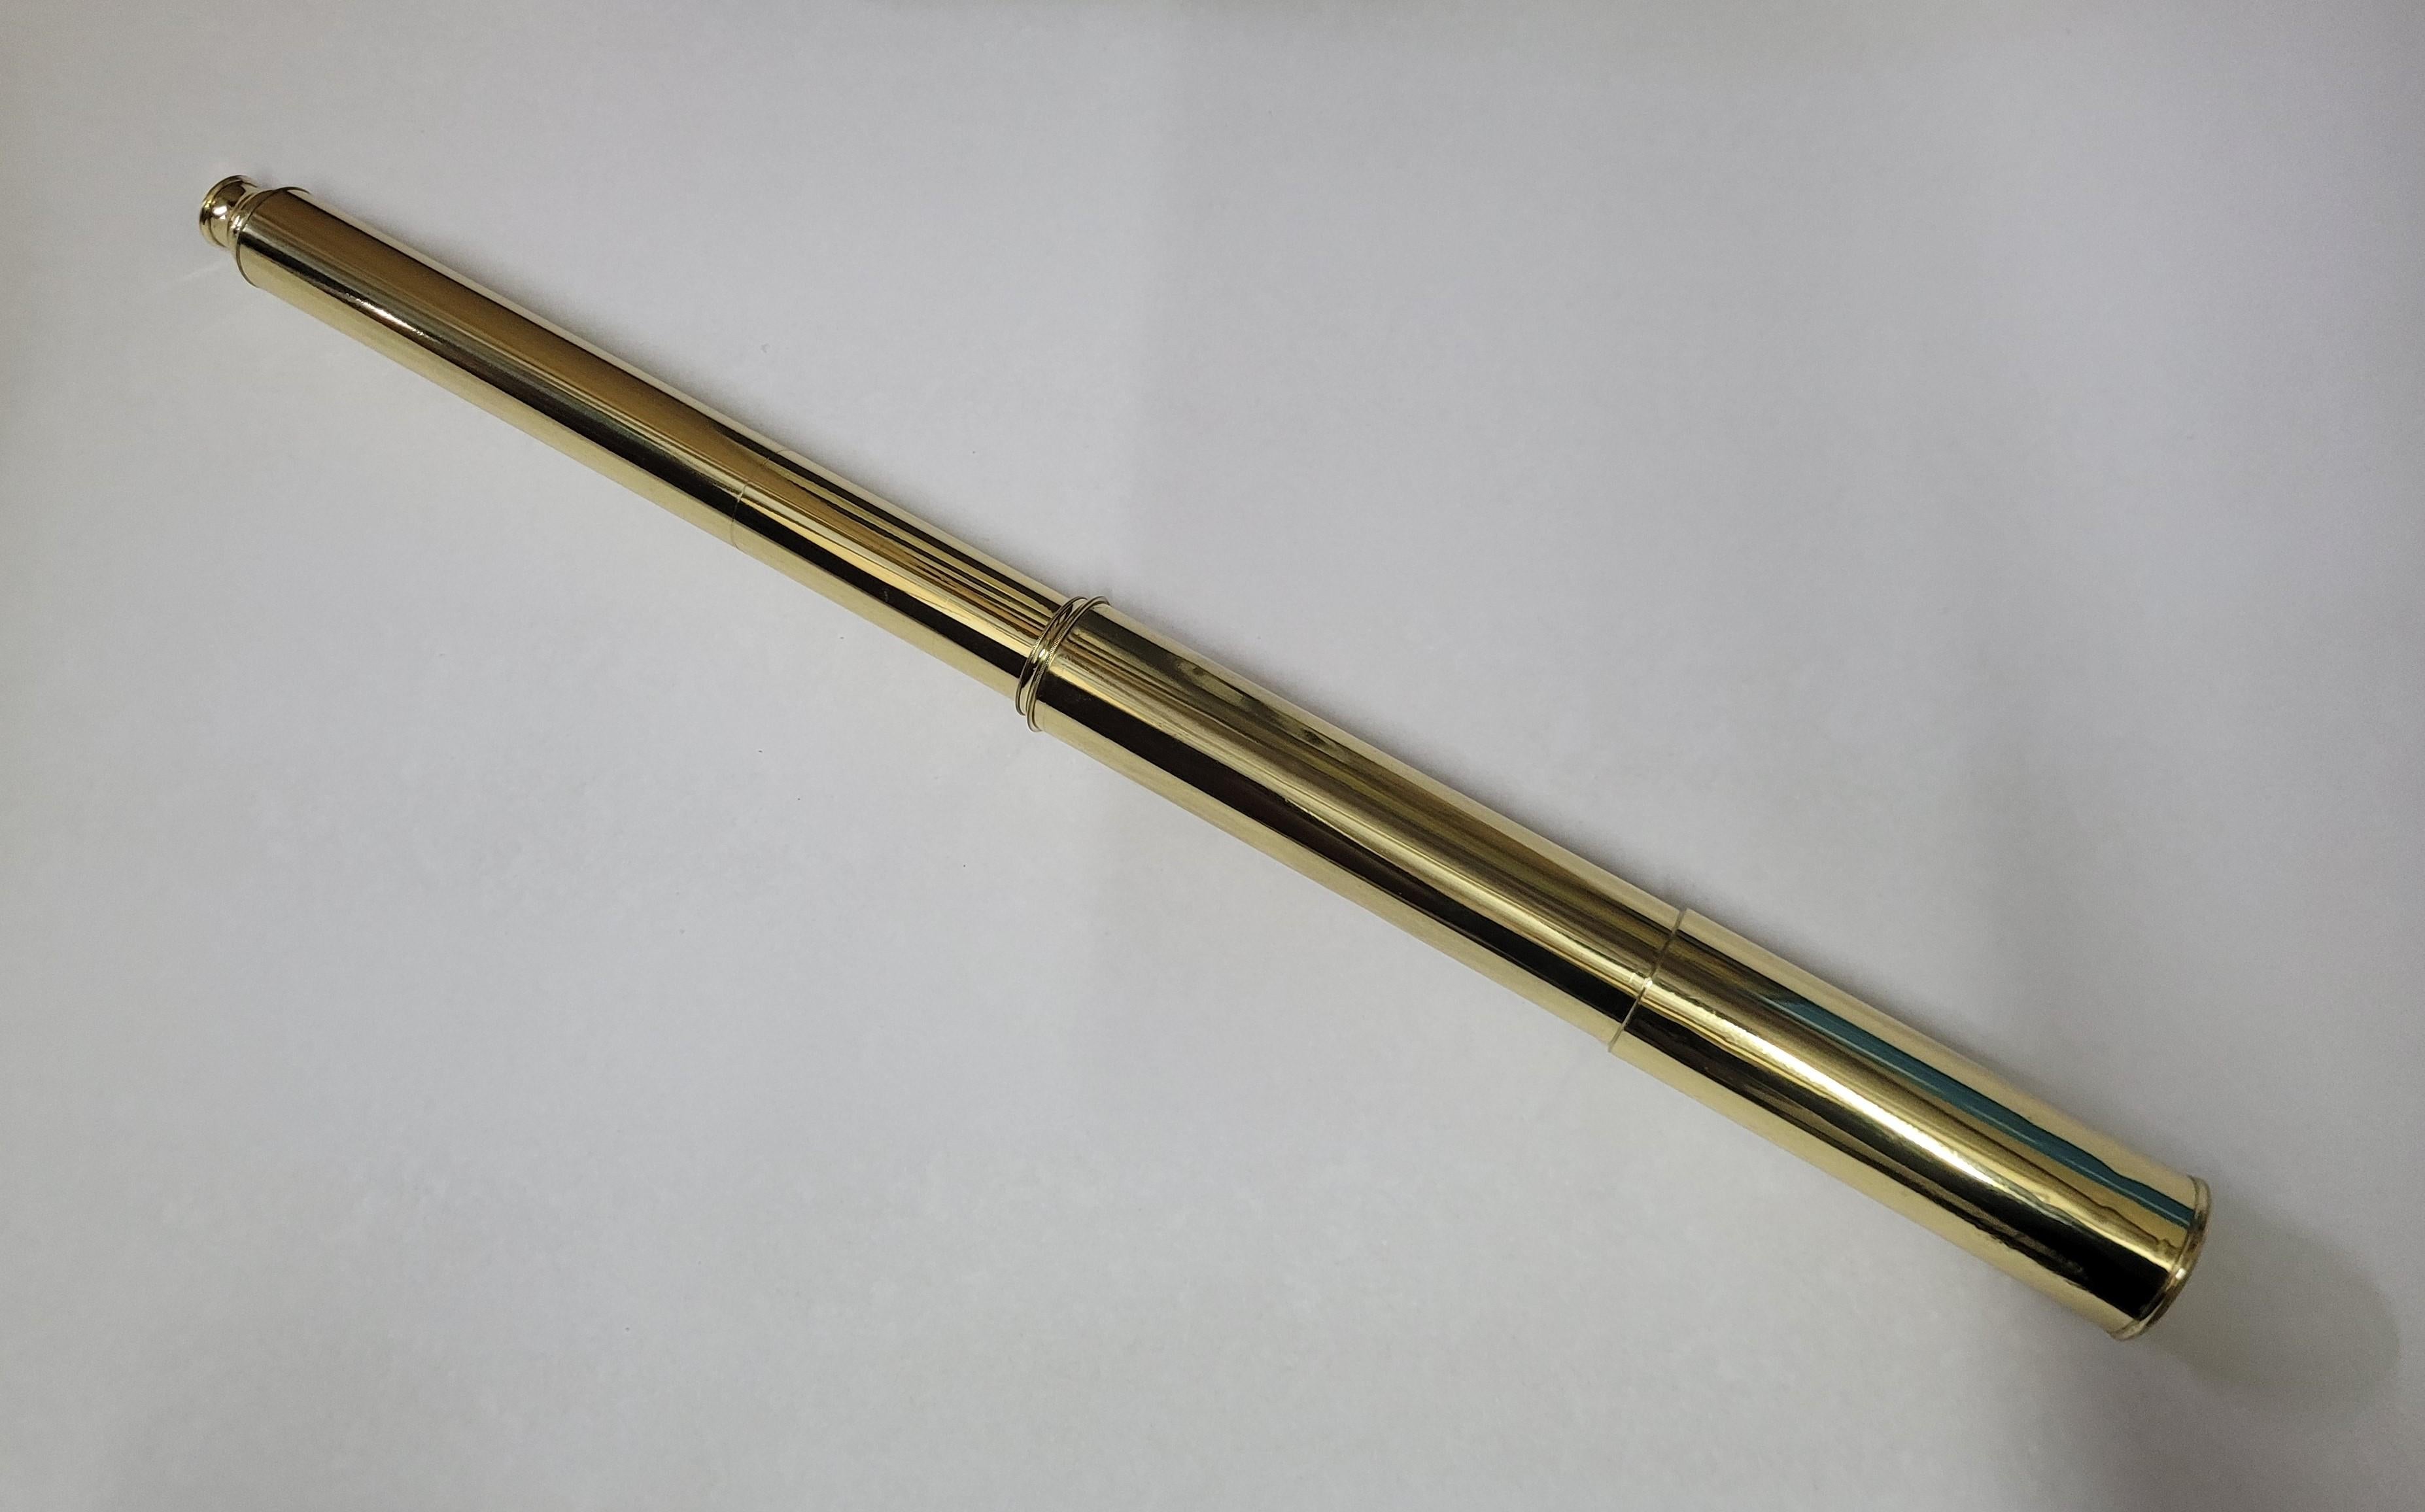 Ships spyglass telescope appropriate for use on a yacht, ship, or anywhere with a view. This has been meticulously polished and lacquered. We just restored a great collection of these. This fine instrument has a single draw barrel of solid brass.